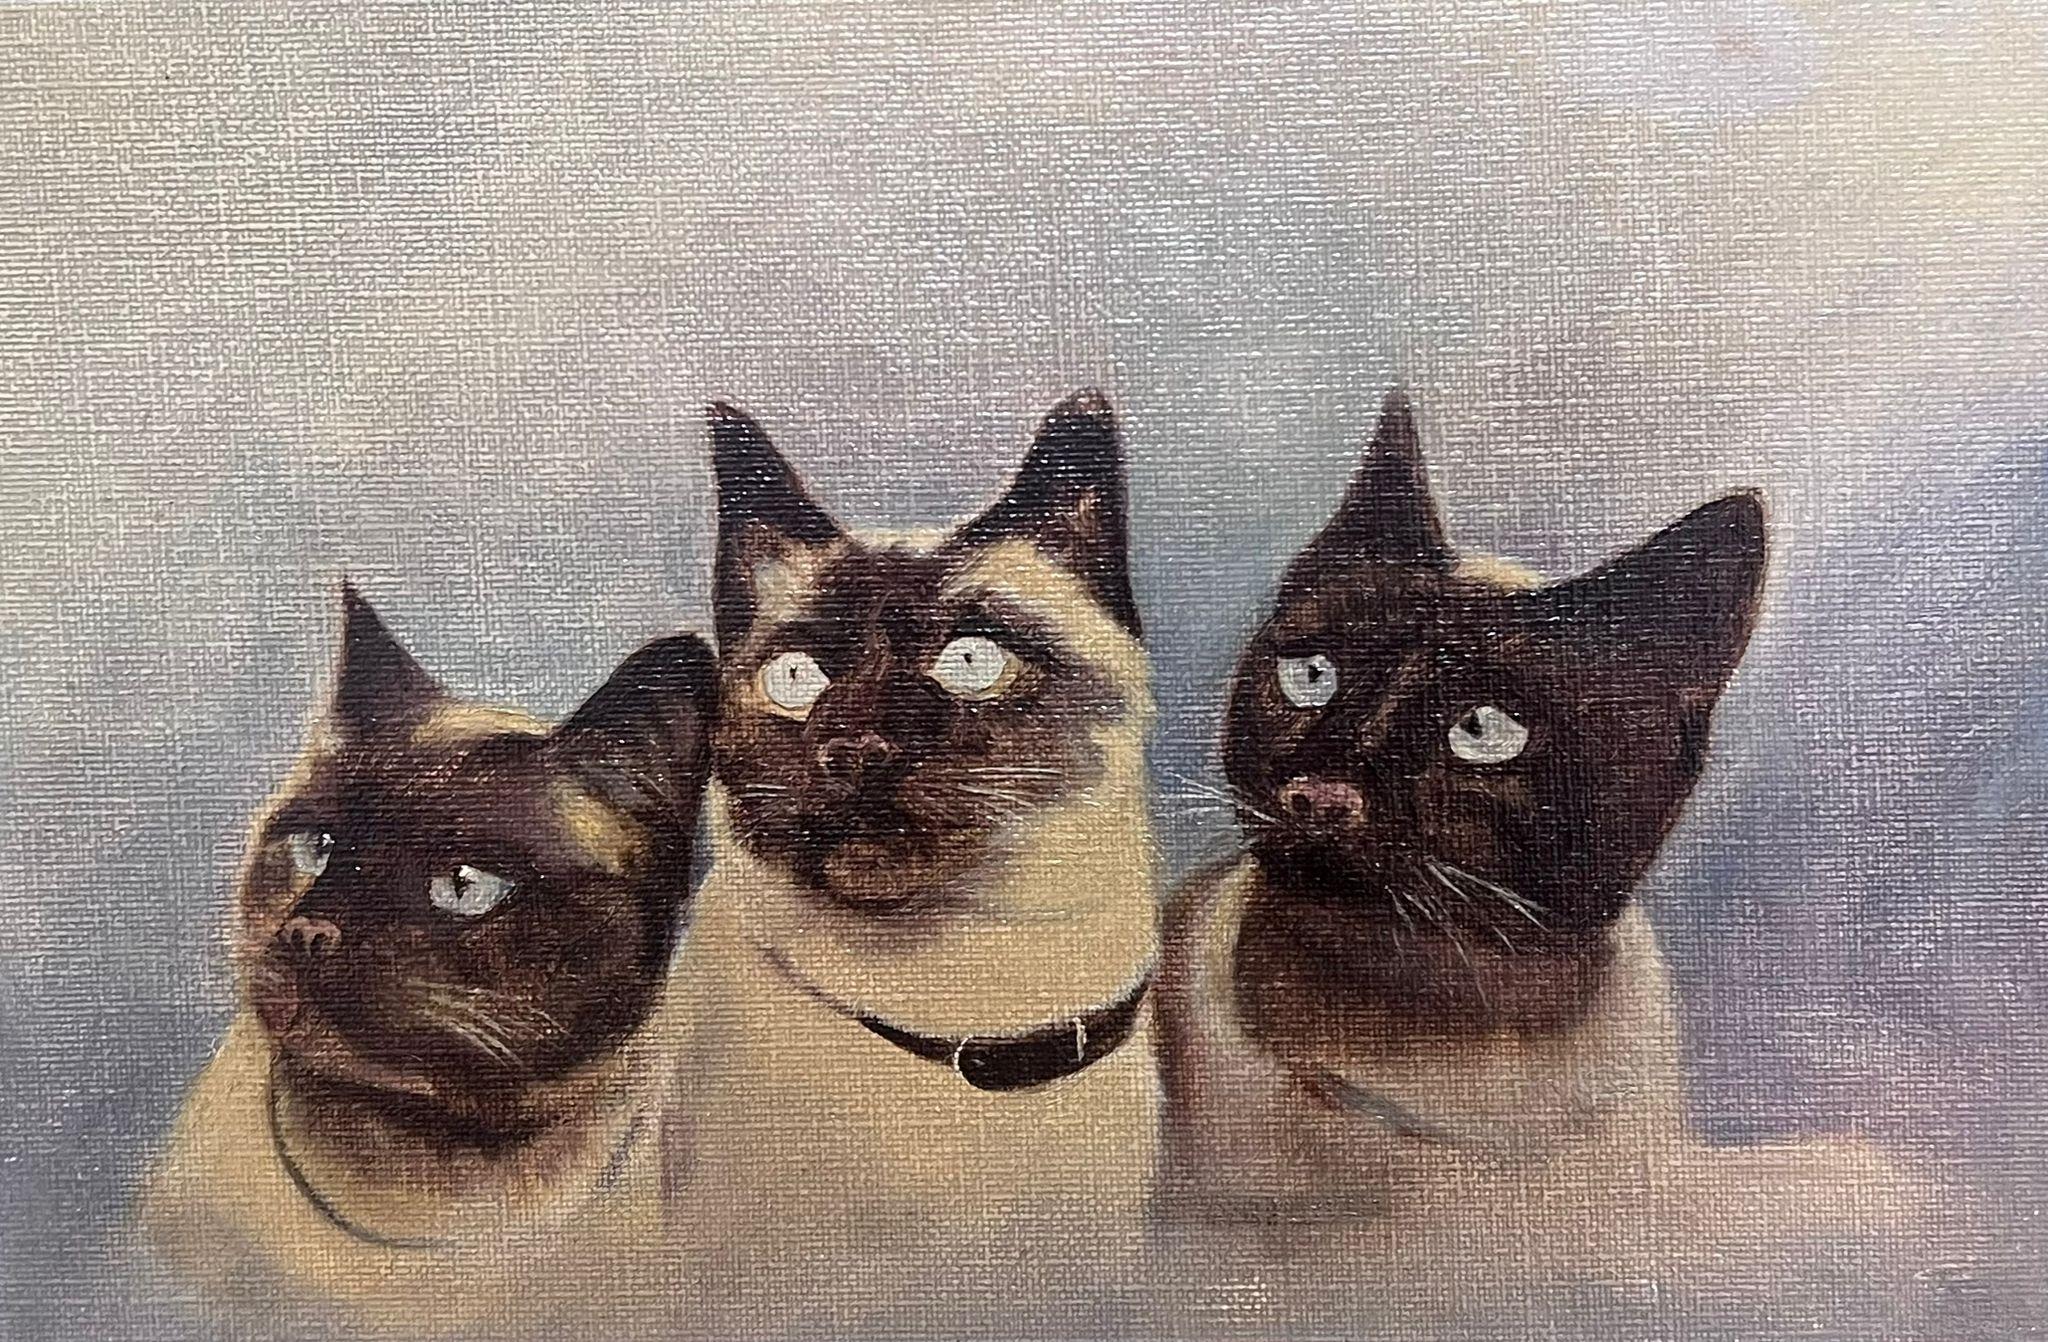 Three Siamese (?) Cats
English artist, circa 1900's
oil on board, framed
framed: 10 x 14 inches
board: 8 x 12 inches
provenance: private collection, England
condition: overall good and sound condition